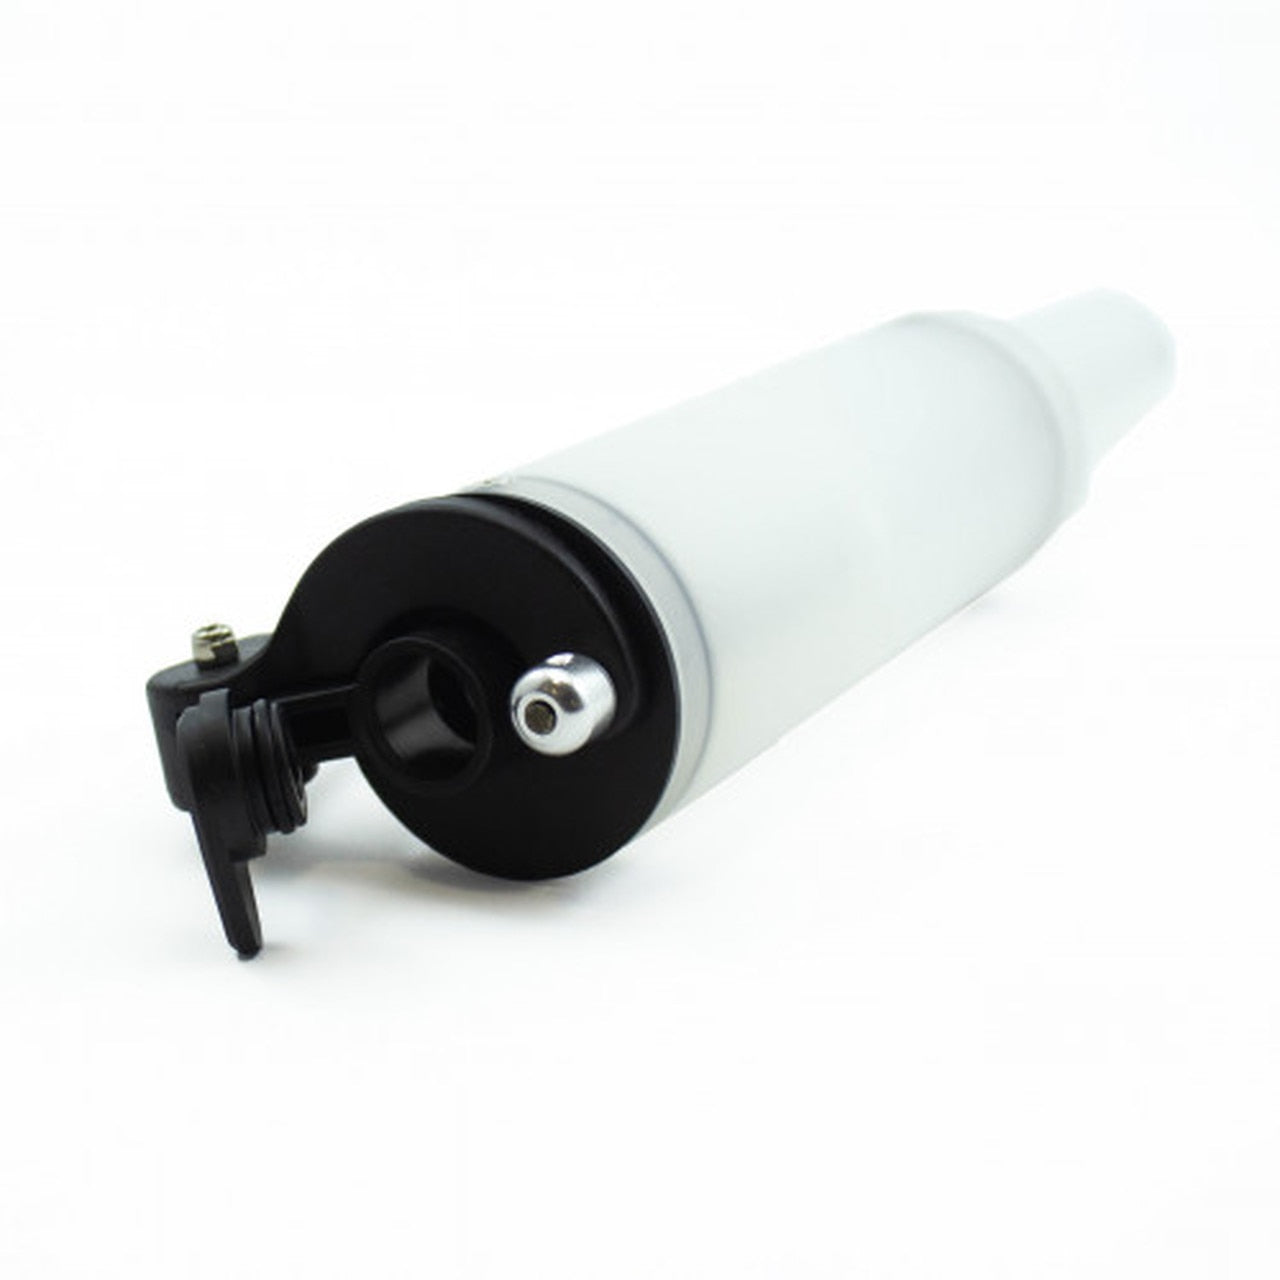 Ultimate Racing Fuel Stick con cubo visible 